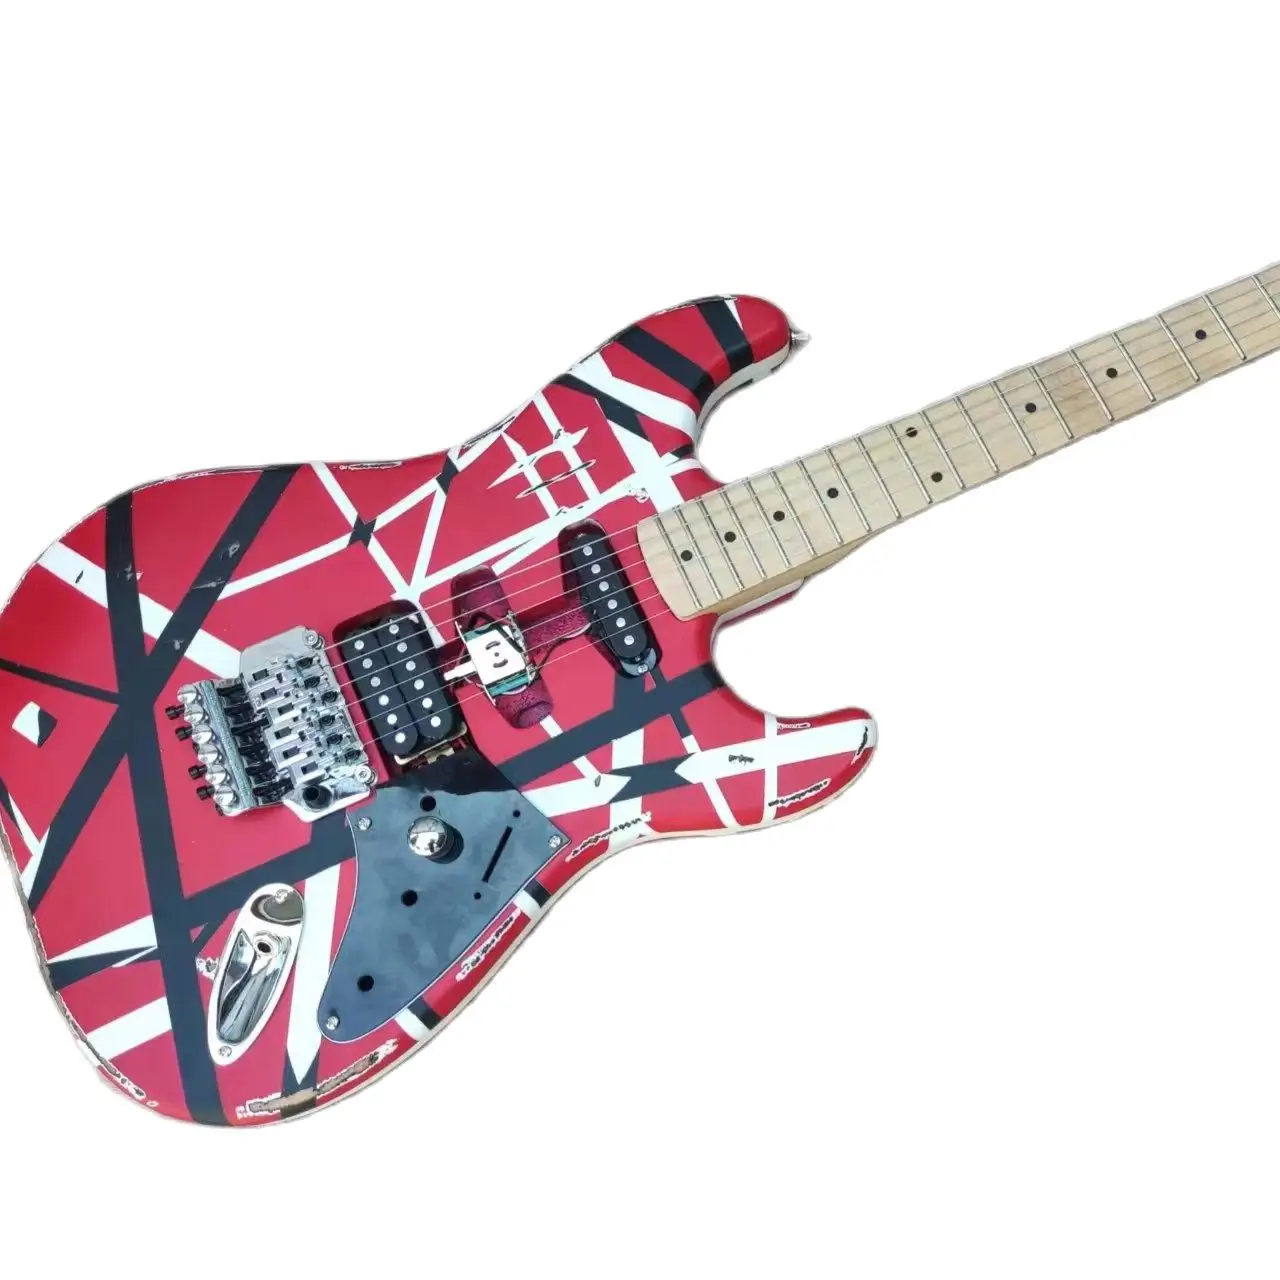 

Six string electric guitar. We customize all kinds of guitars